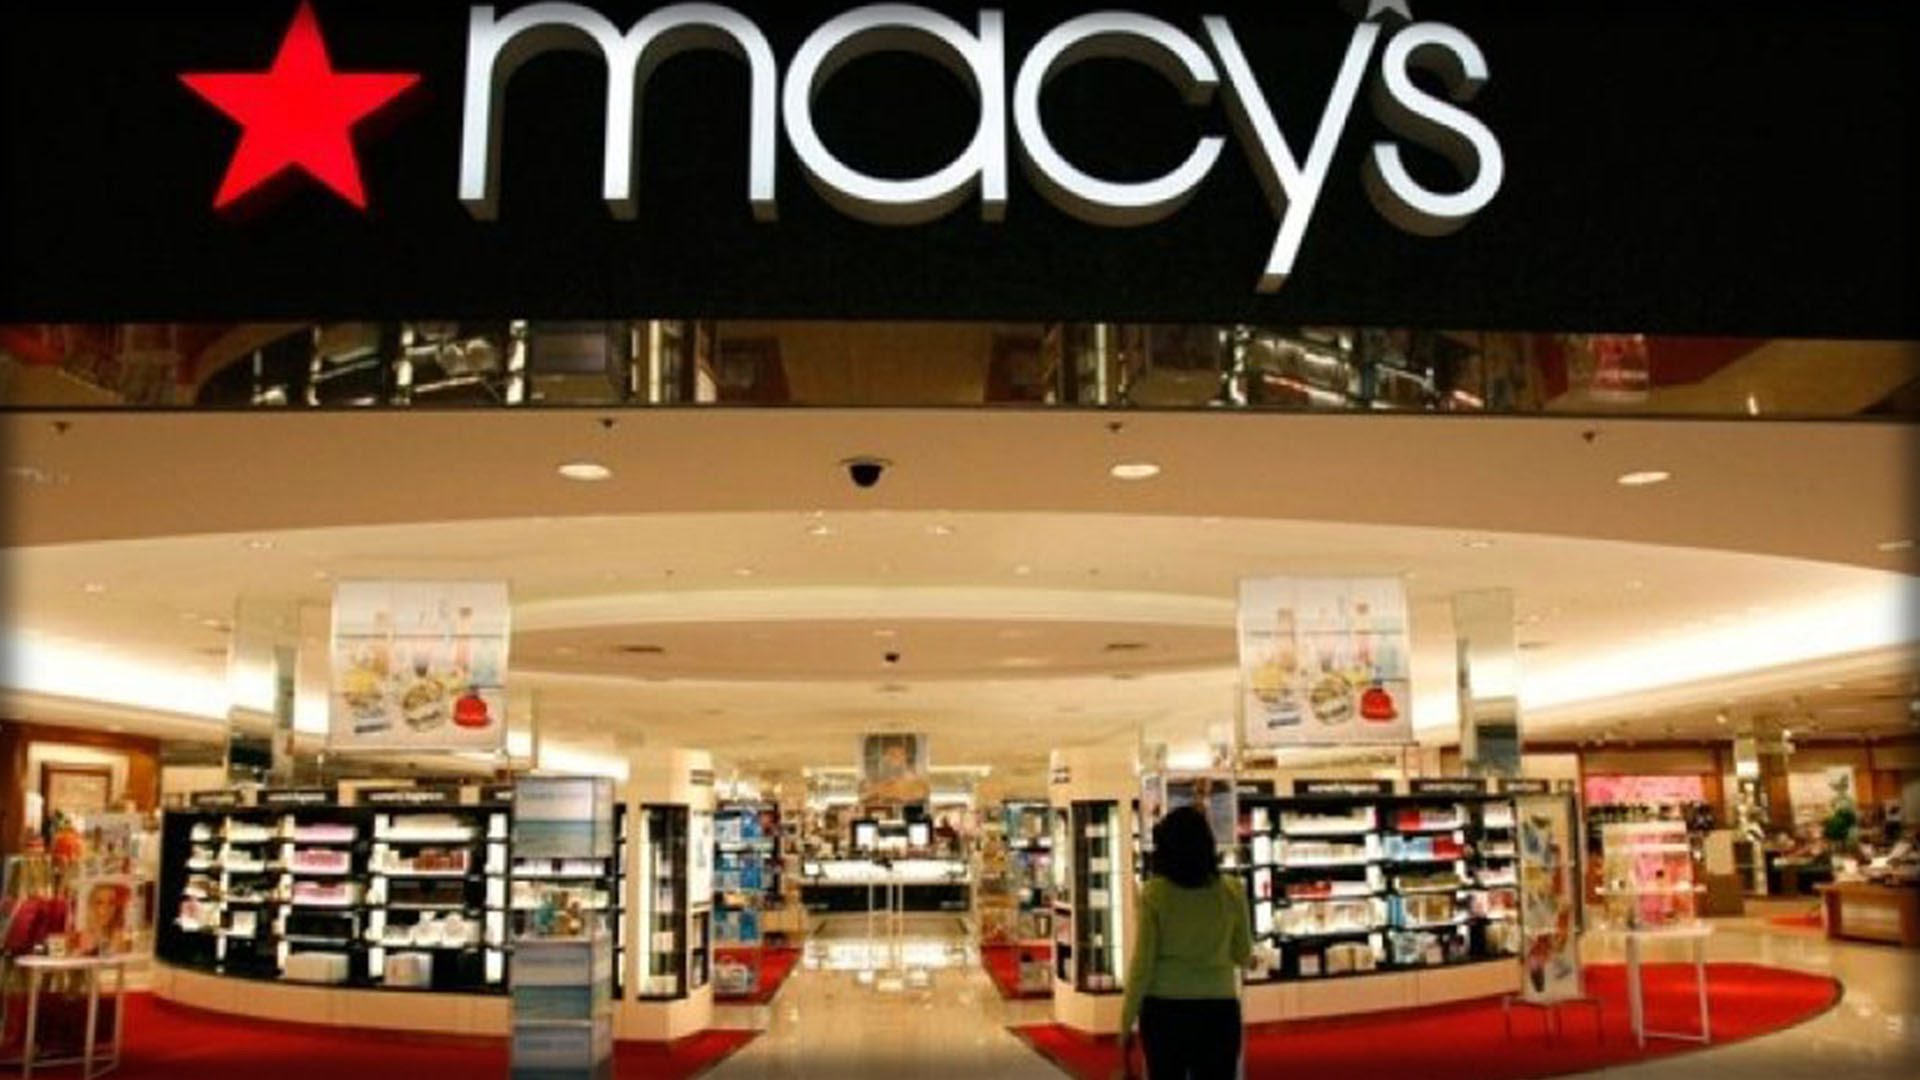 RETAIL COLLAPSE: MACY'S CLOSING 100 STORES - YouTube